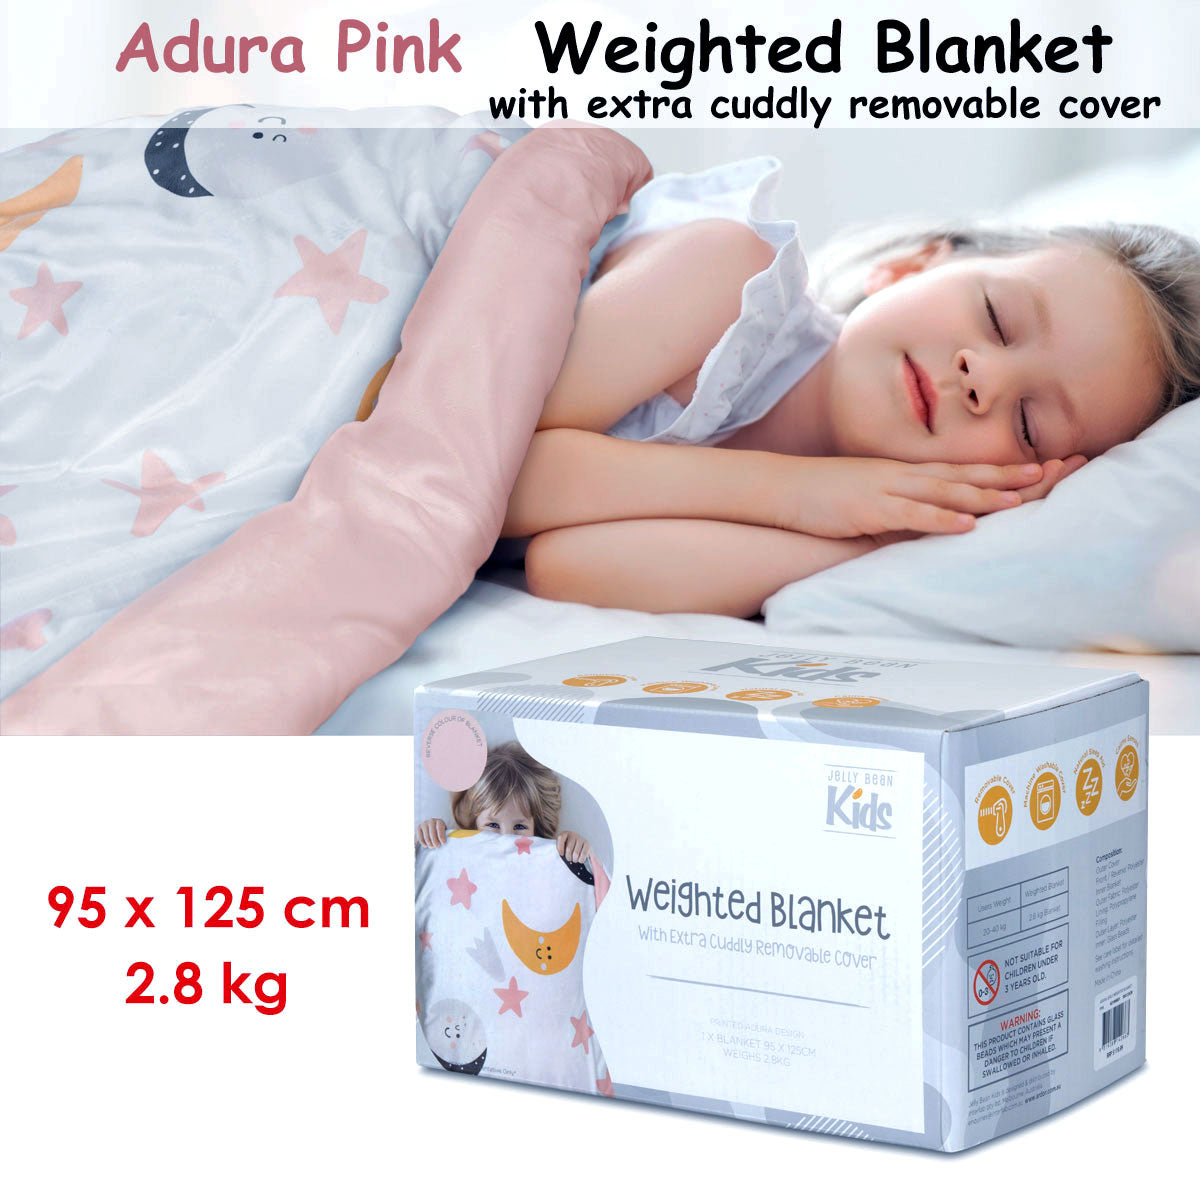 Jelly Bean Kids Adura Pink Kids Weighted Blanket with Extra Cuddly Removable Cover 2.8kg 95 x 125 cm - Home & Garden > Bedding - Zanlana Design and Home Decor